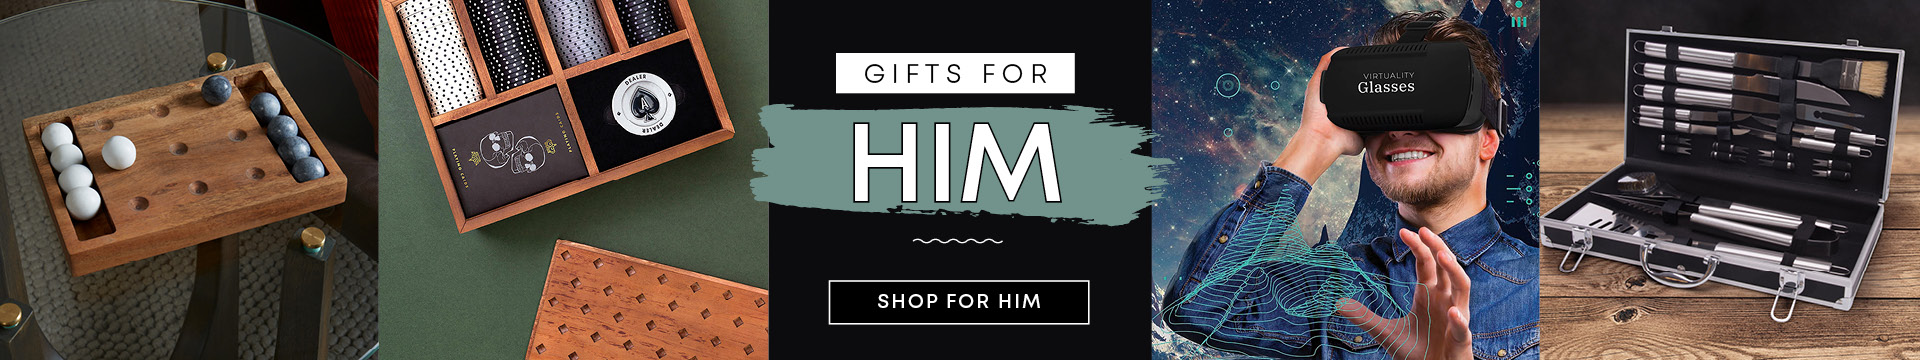 Top Gifts for Him